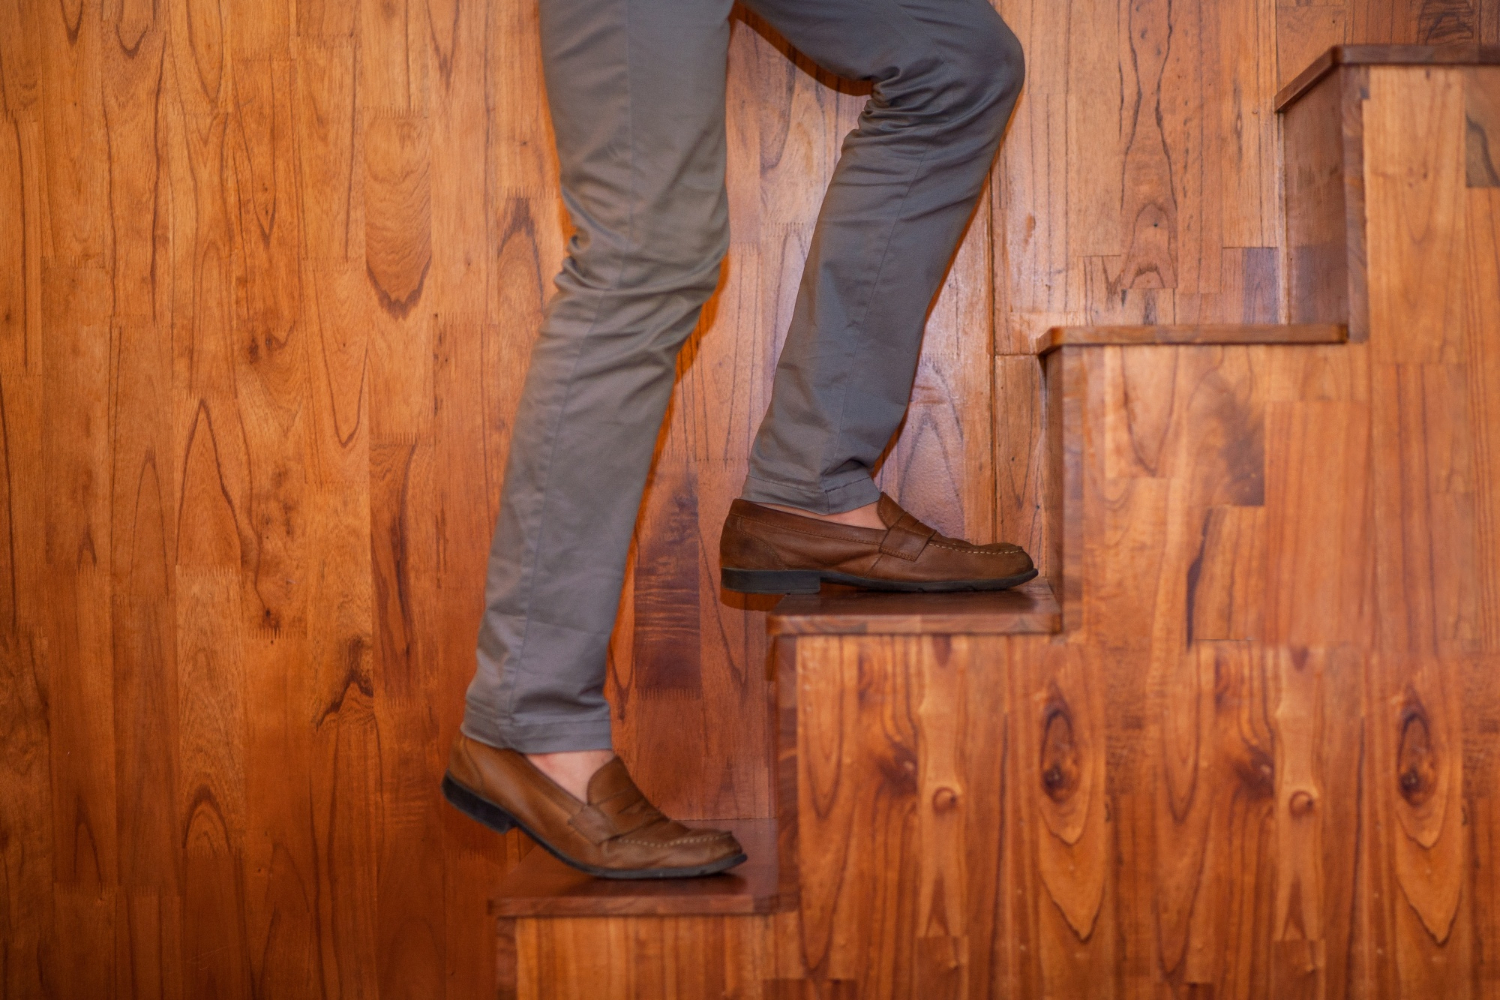 Sockless look with gray pants and brown loafers